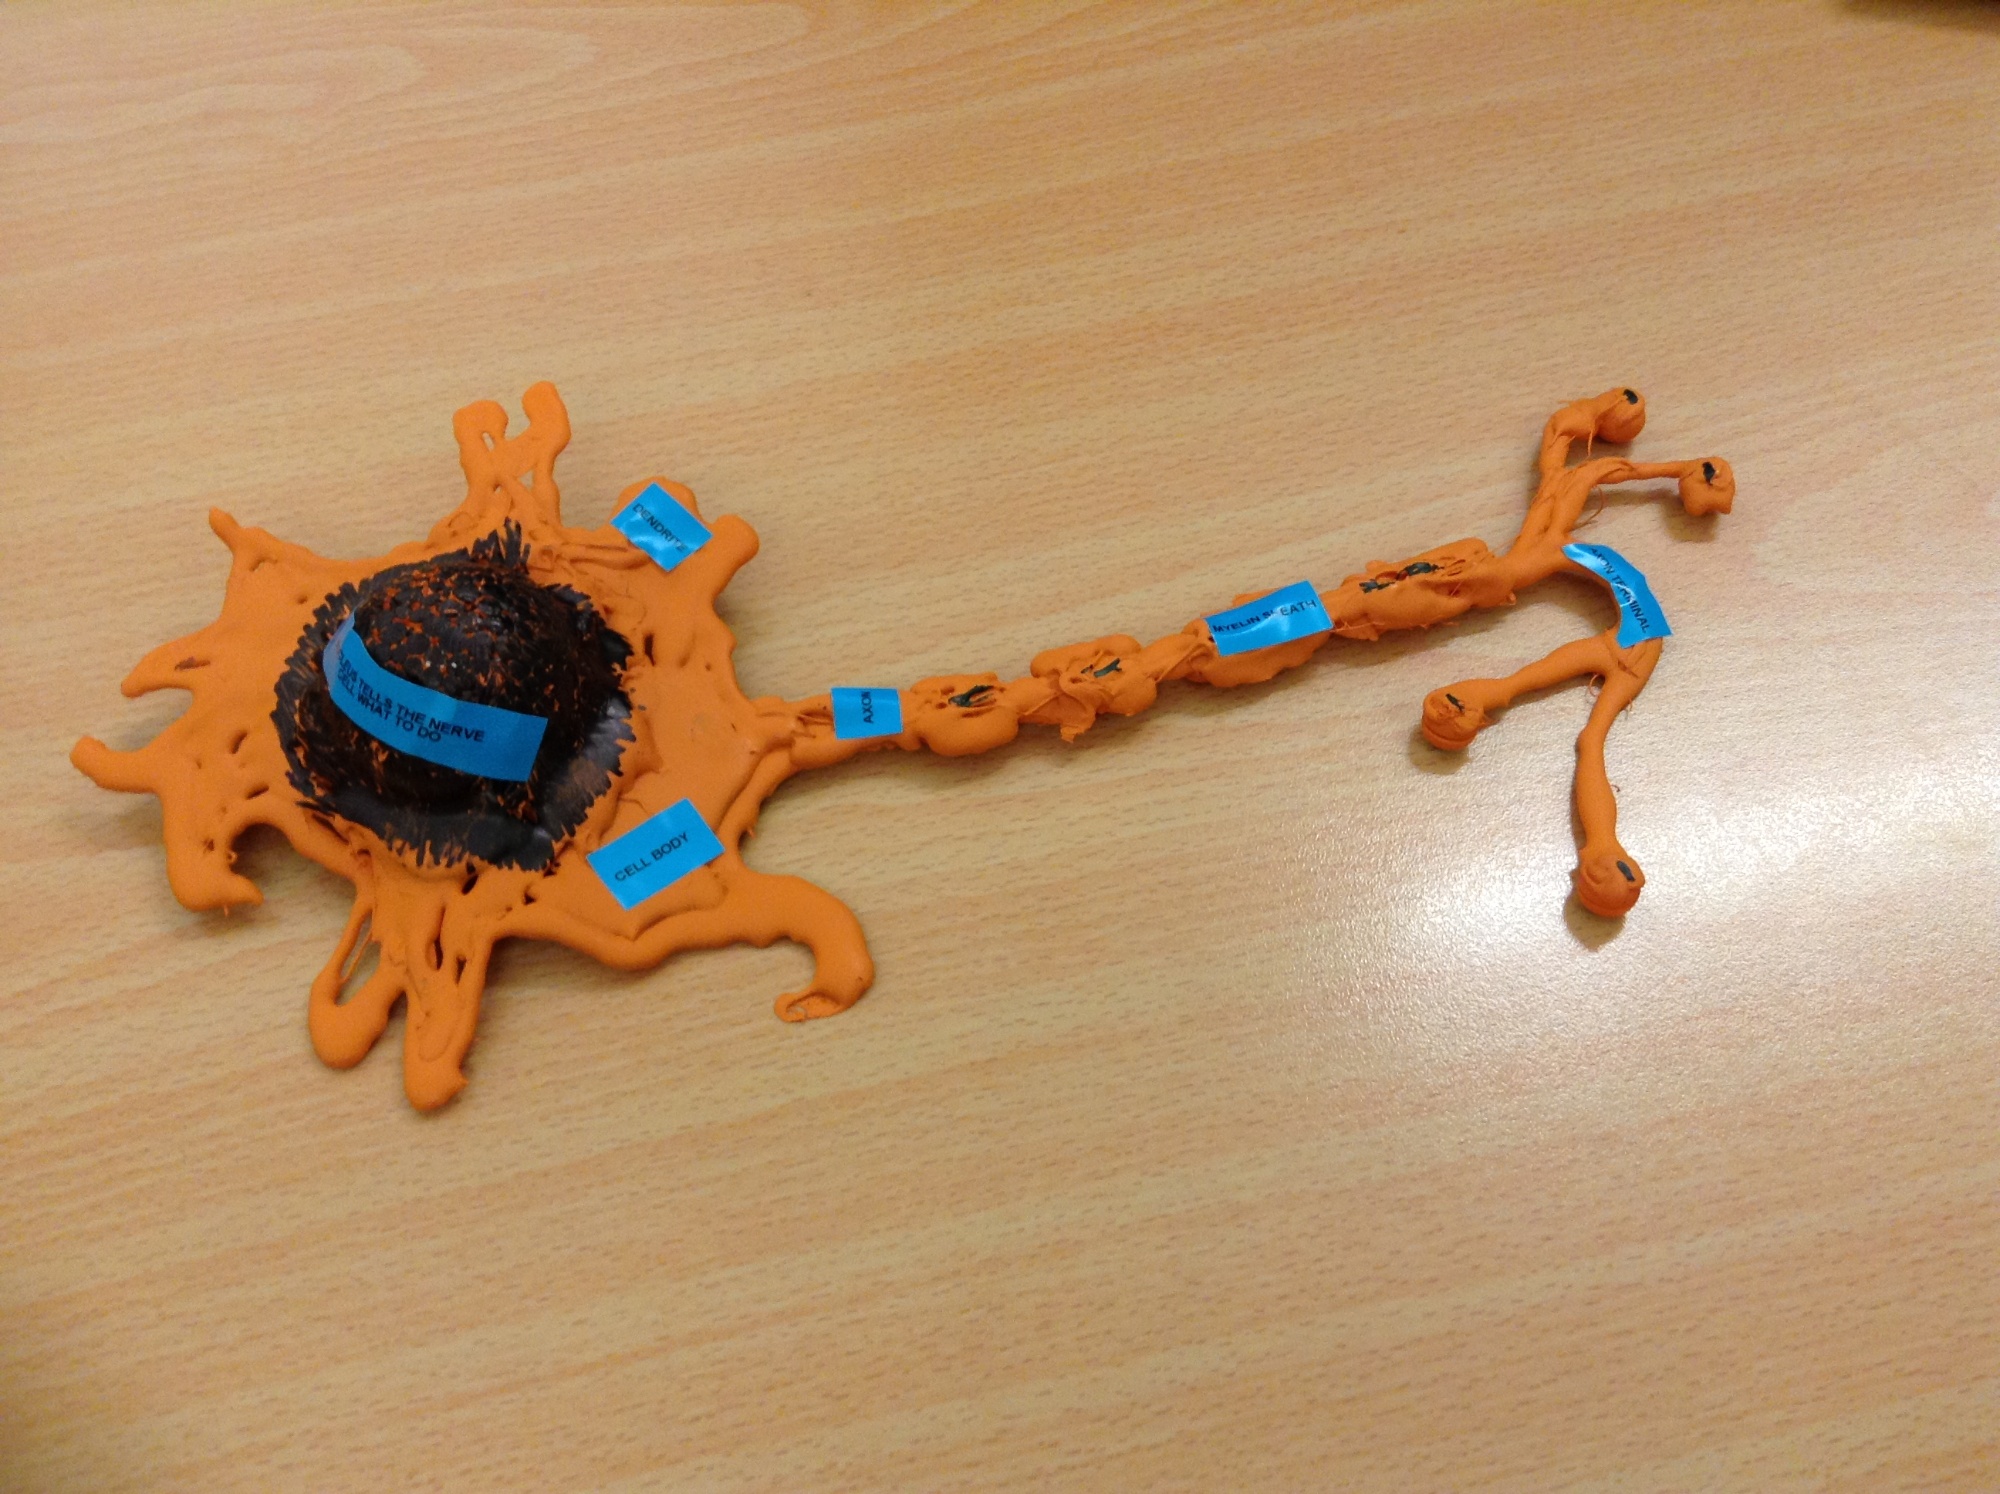 Model of a cell by Jenson